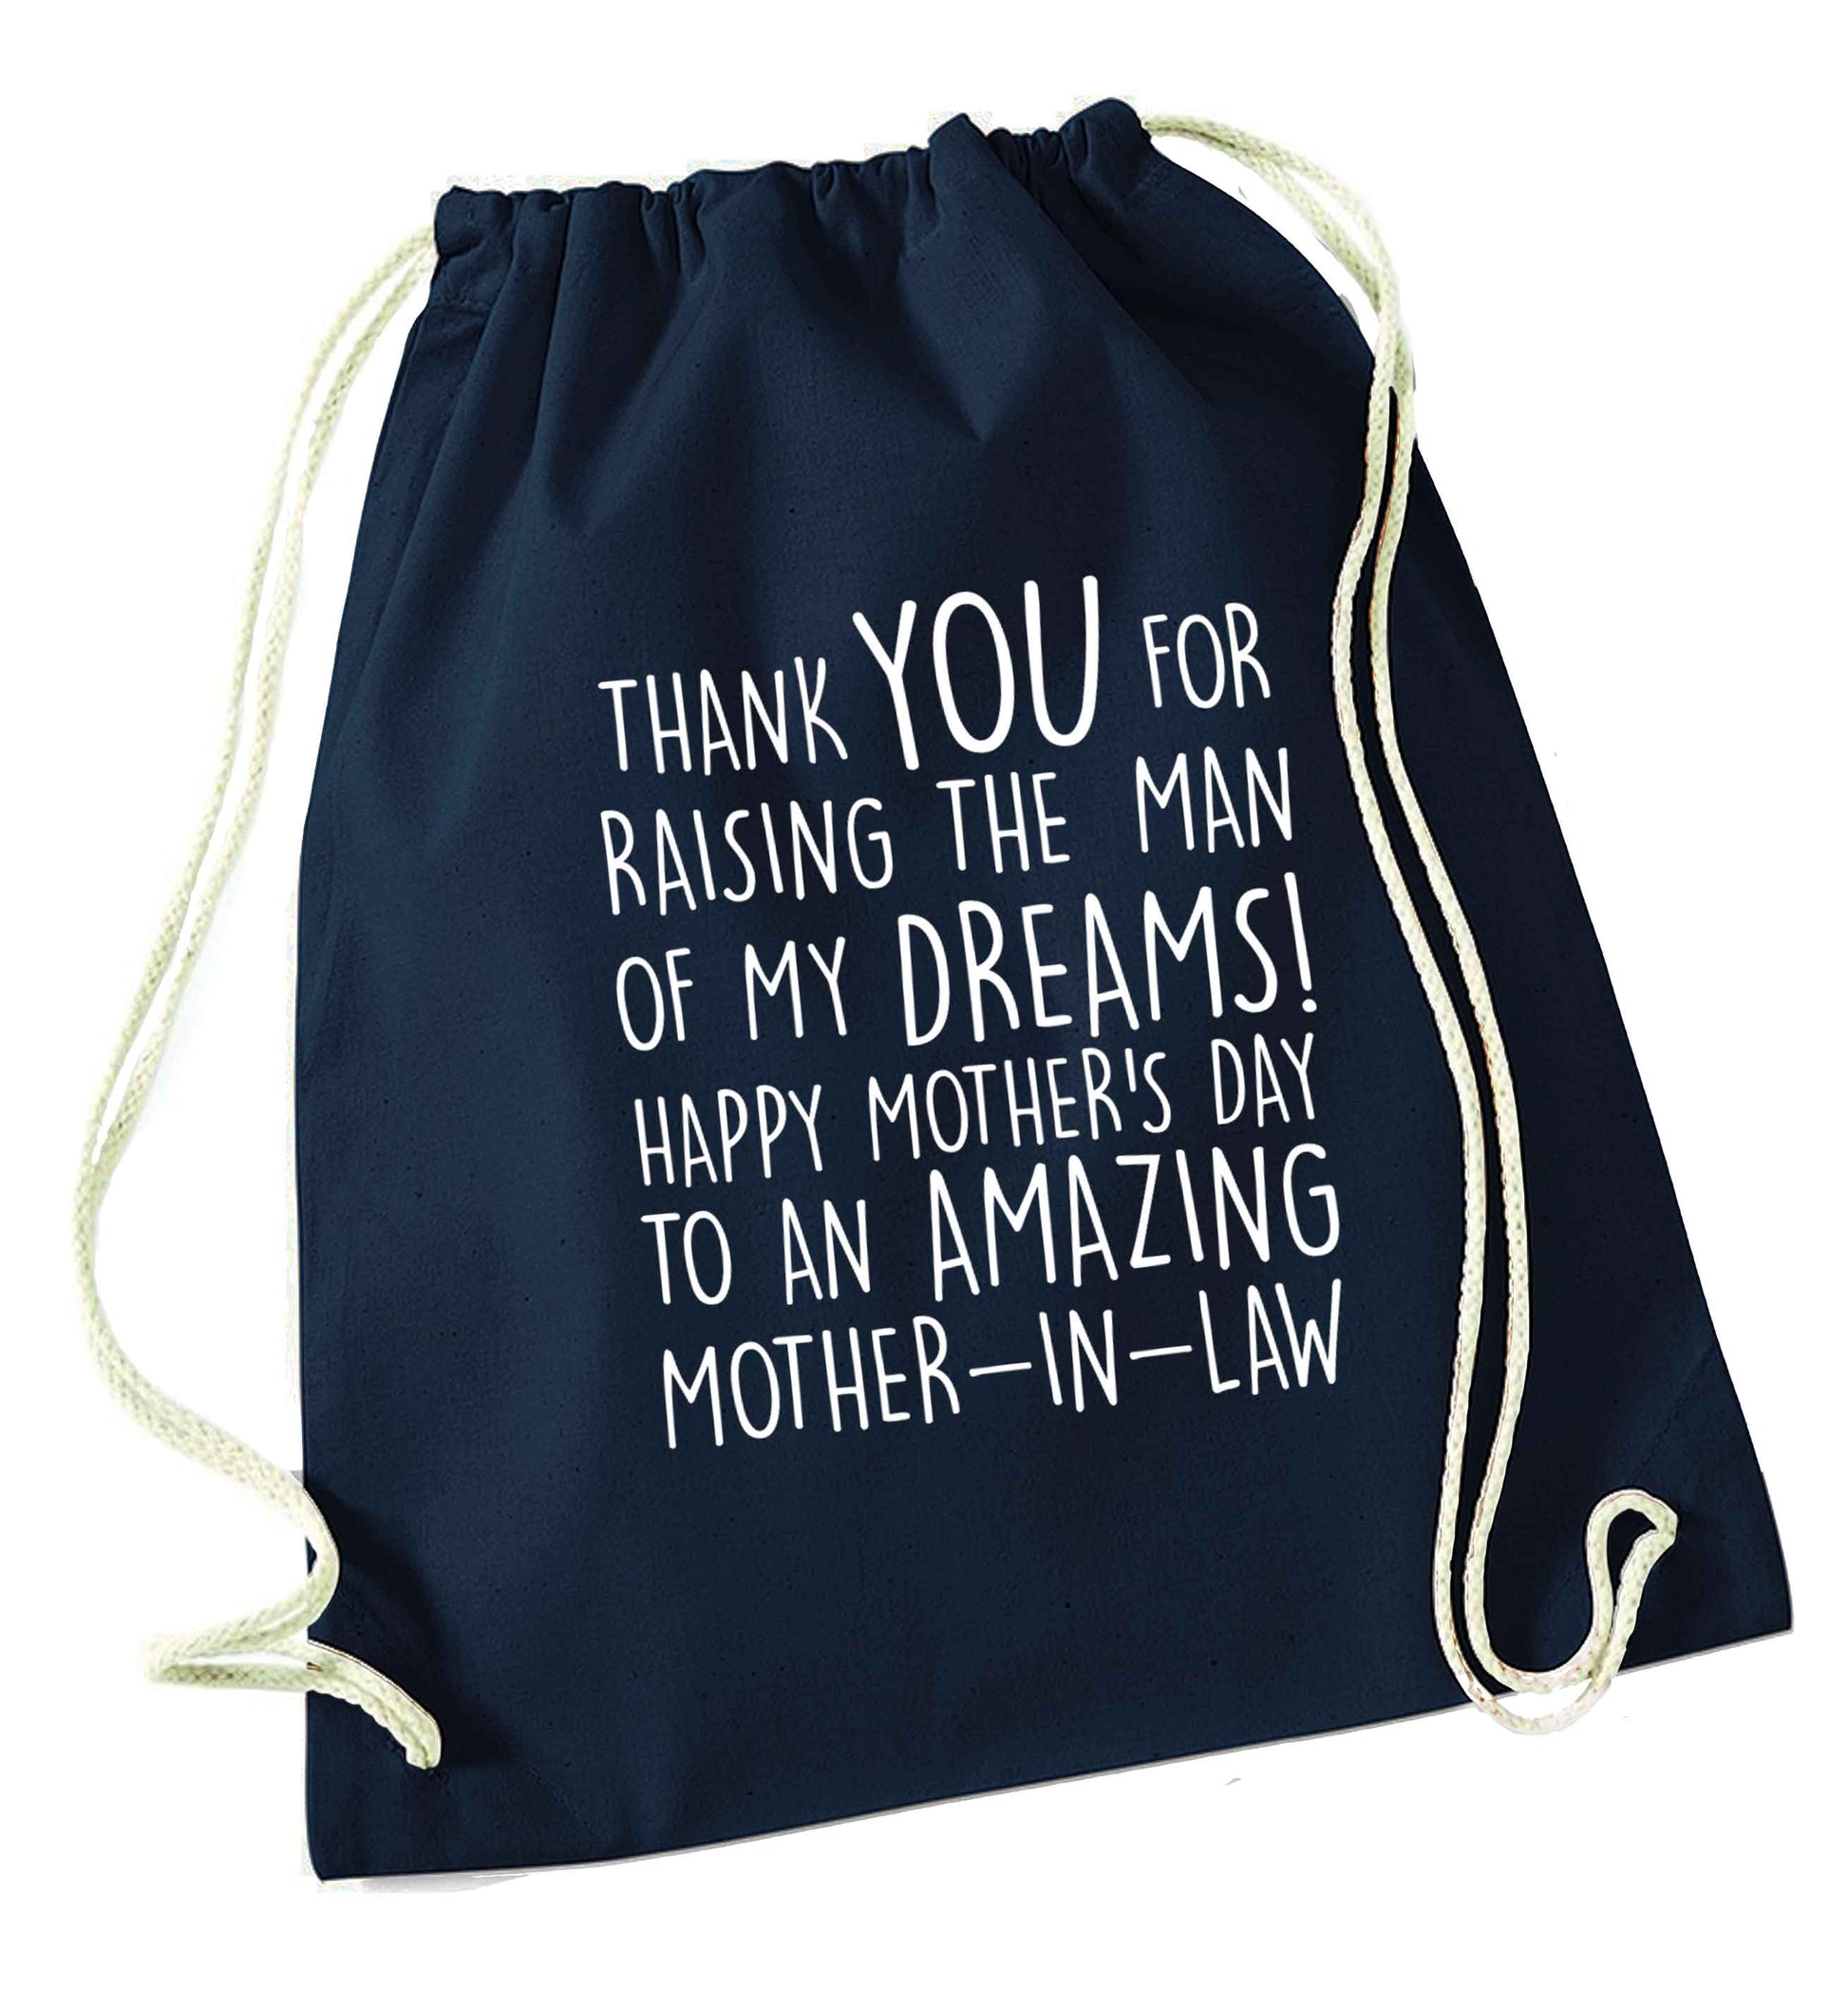 Raising the man of my dreams mother's day mother-in-law navy drawstring bag